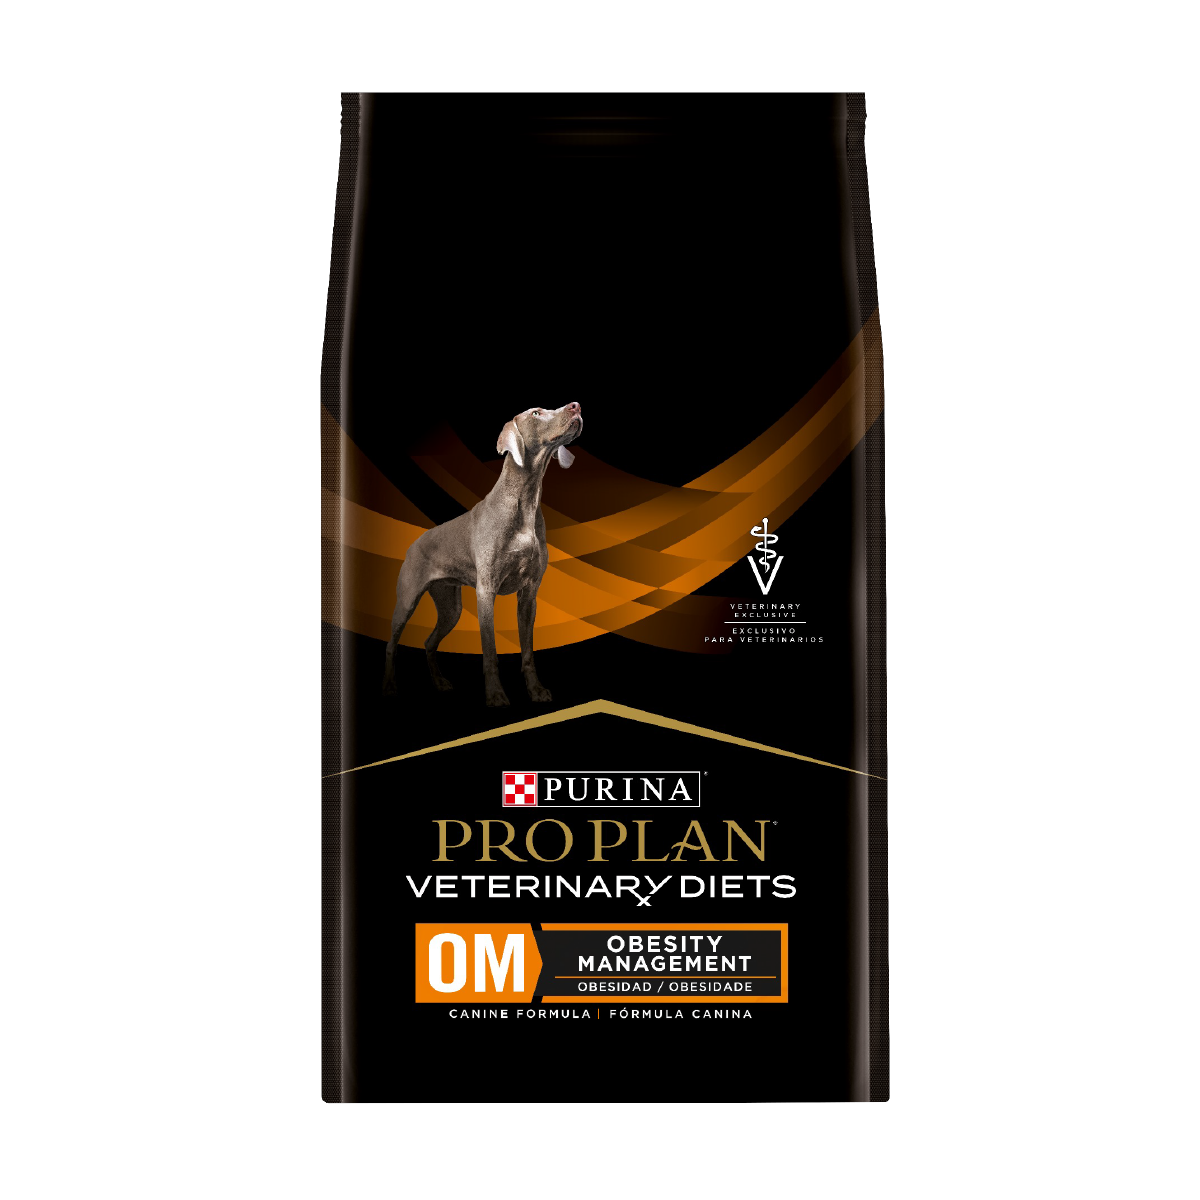 purina-pro-plan-veterinay-diets-dog-om-obesity-management.png